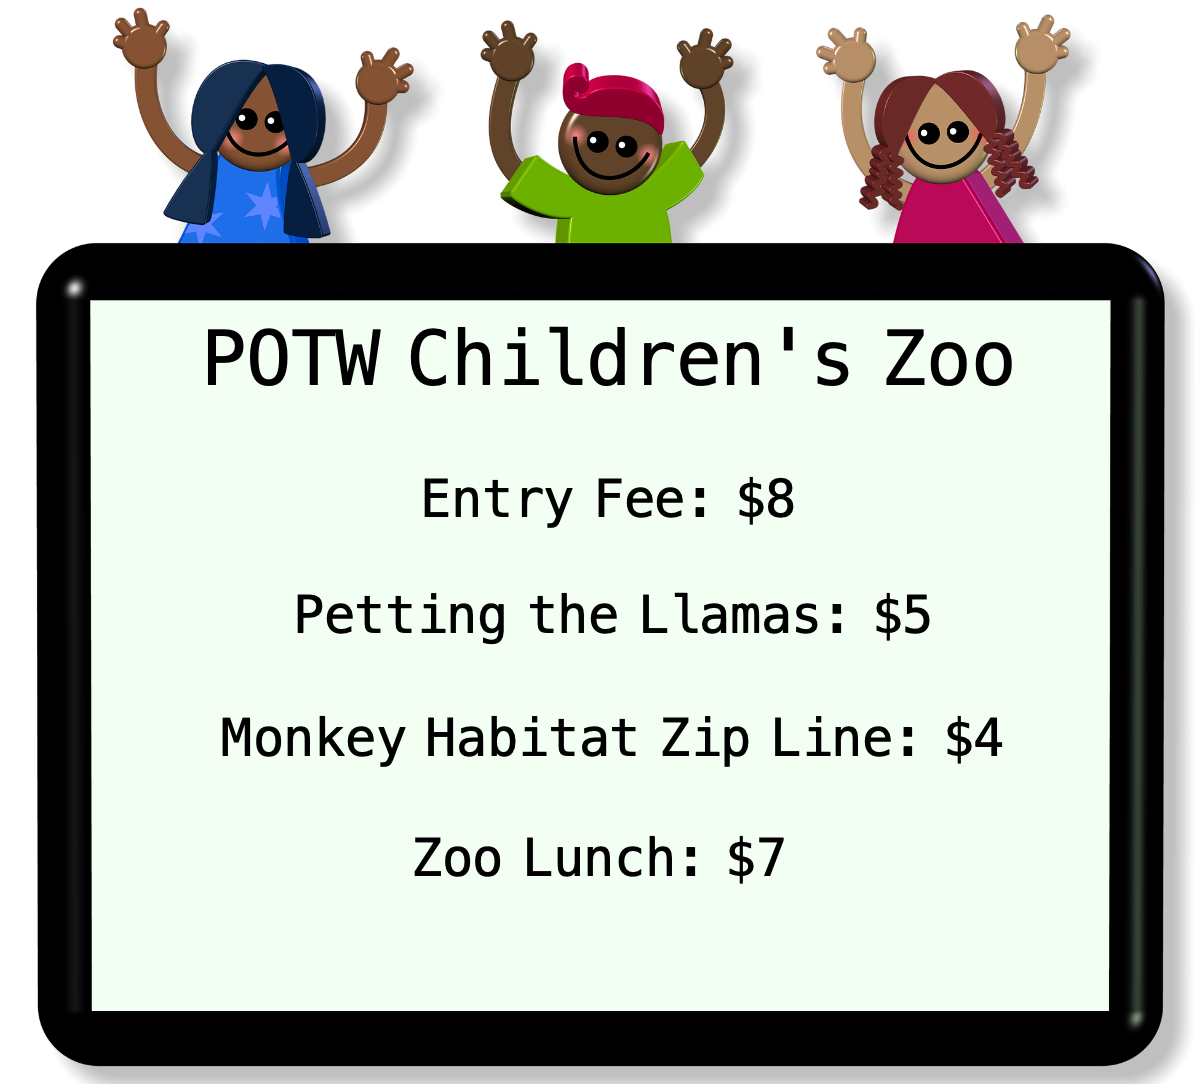 The Entry Fee is 8 dollars. Petting the Llamas costs 5
dollars. The Monkey Habitat Zip Line costs 4 dollars. The Zoo Lunch
costs 7 dollars.